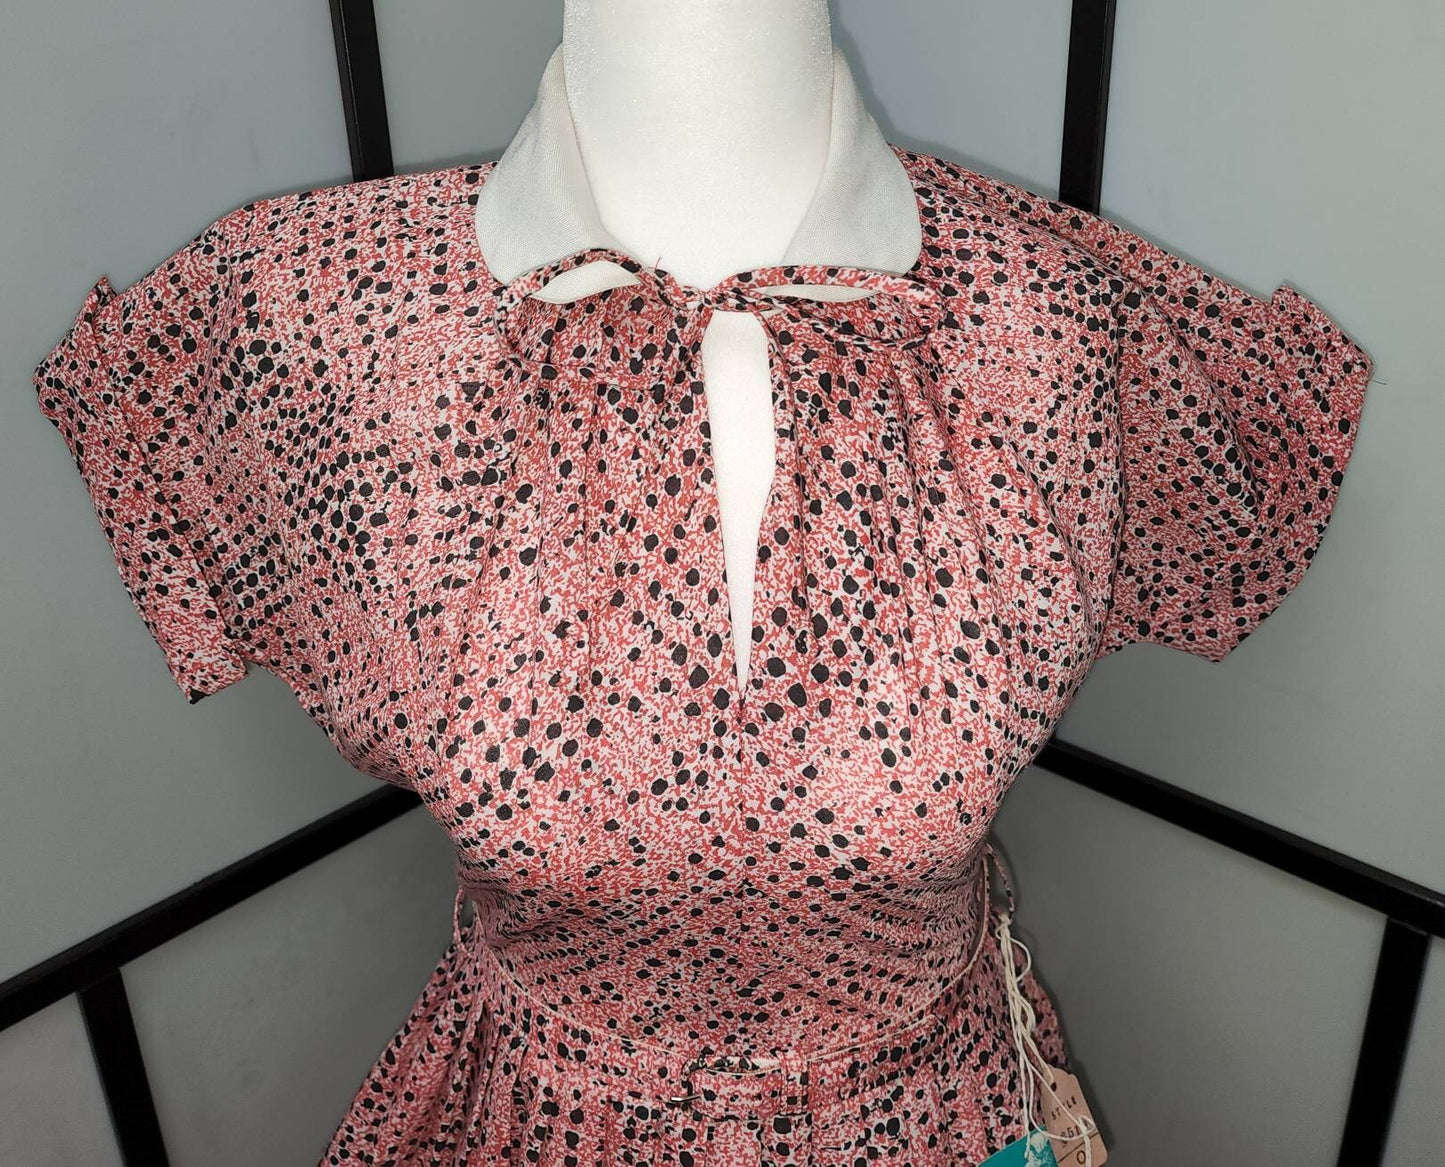 DEADSTOCK Vintage 1950s Dress Red Black Abstract Dot Pattern Day Dress White Collar Keyhole Neck Unworn NWT Mid Century Rockabilly S